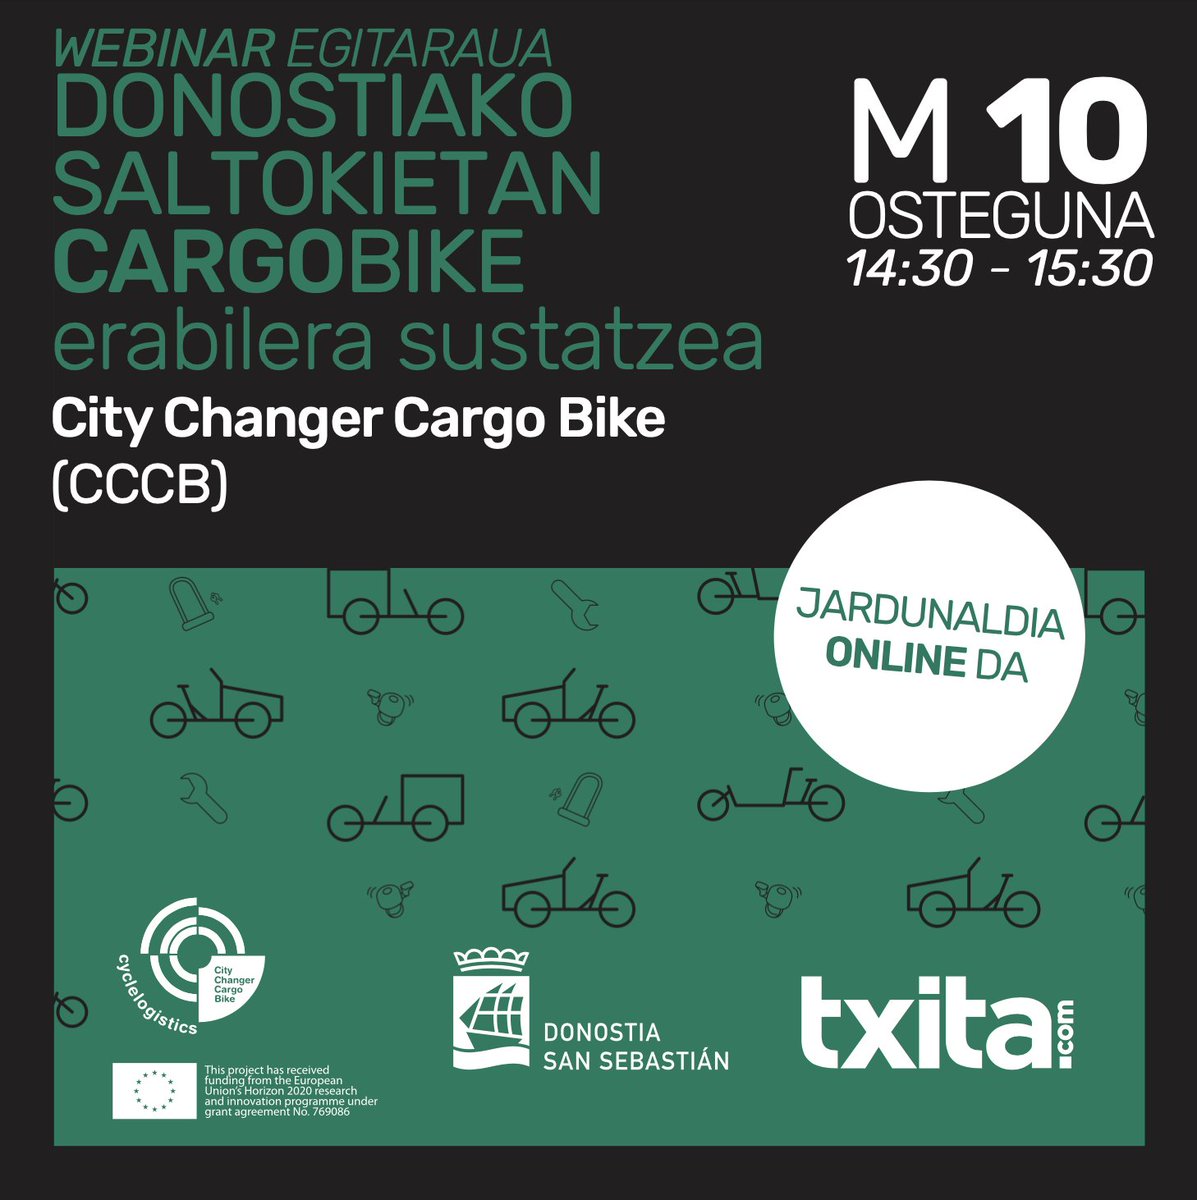 Join our colleagues in Donostia/San Sebastian for a Spanish webinar on the business case for cargo bikes tomorrow from 14:30-15:30. Register at: docs.google.com/forms/d/e/1FAI…